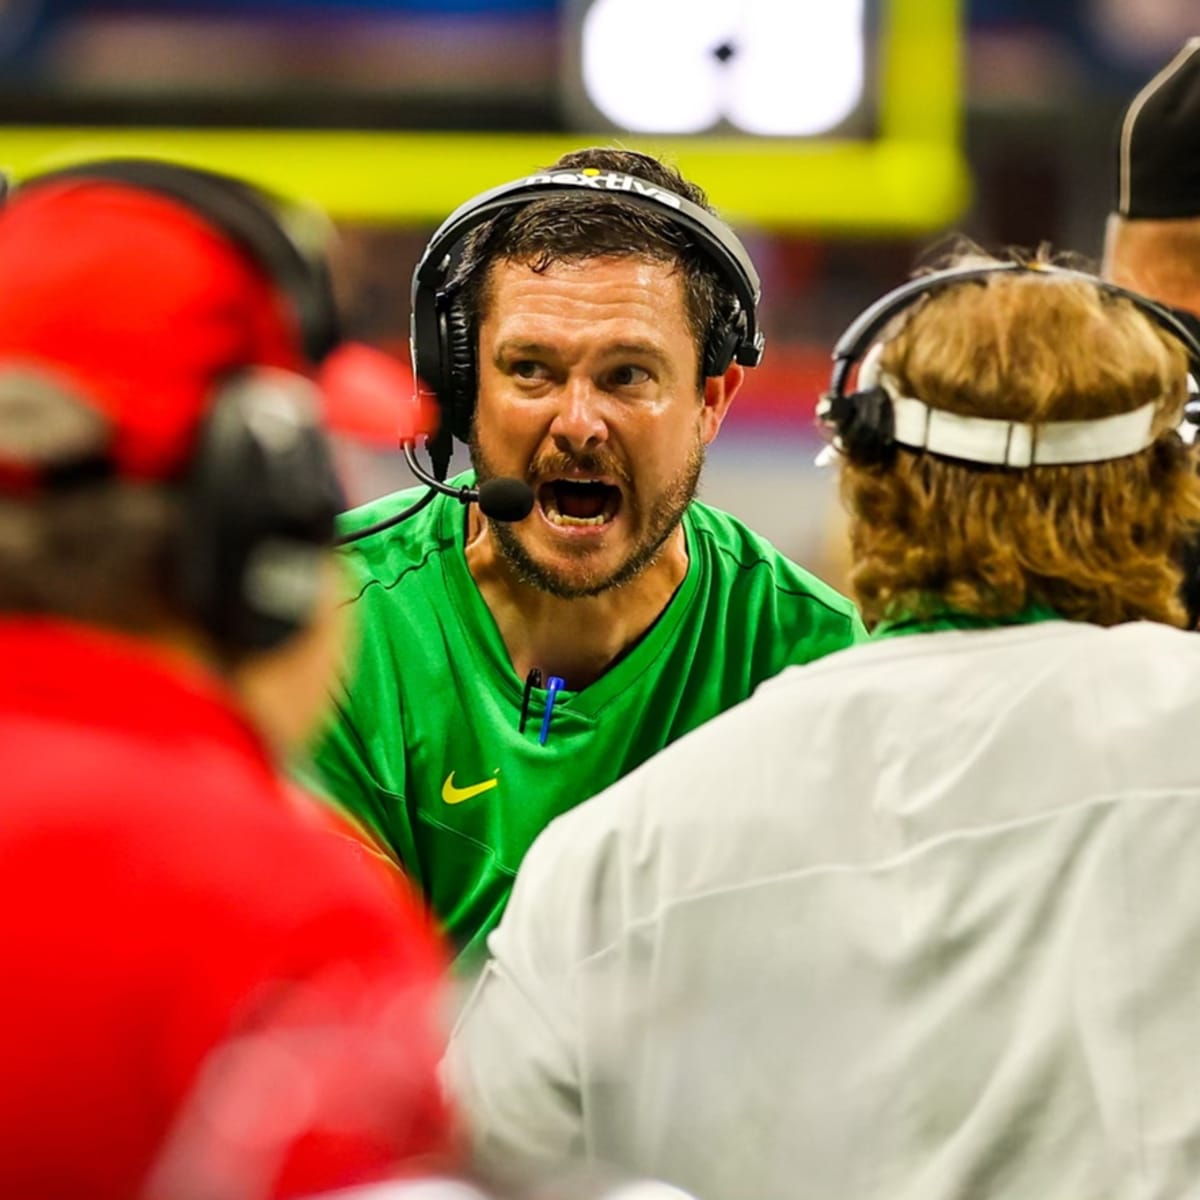 Oregon coach Lanning gives informed perceptions of Georgia players